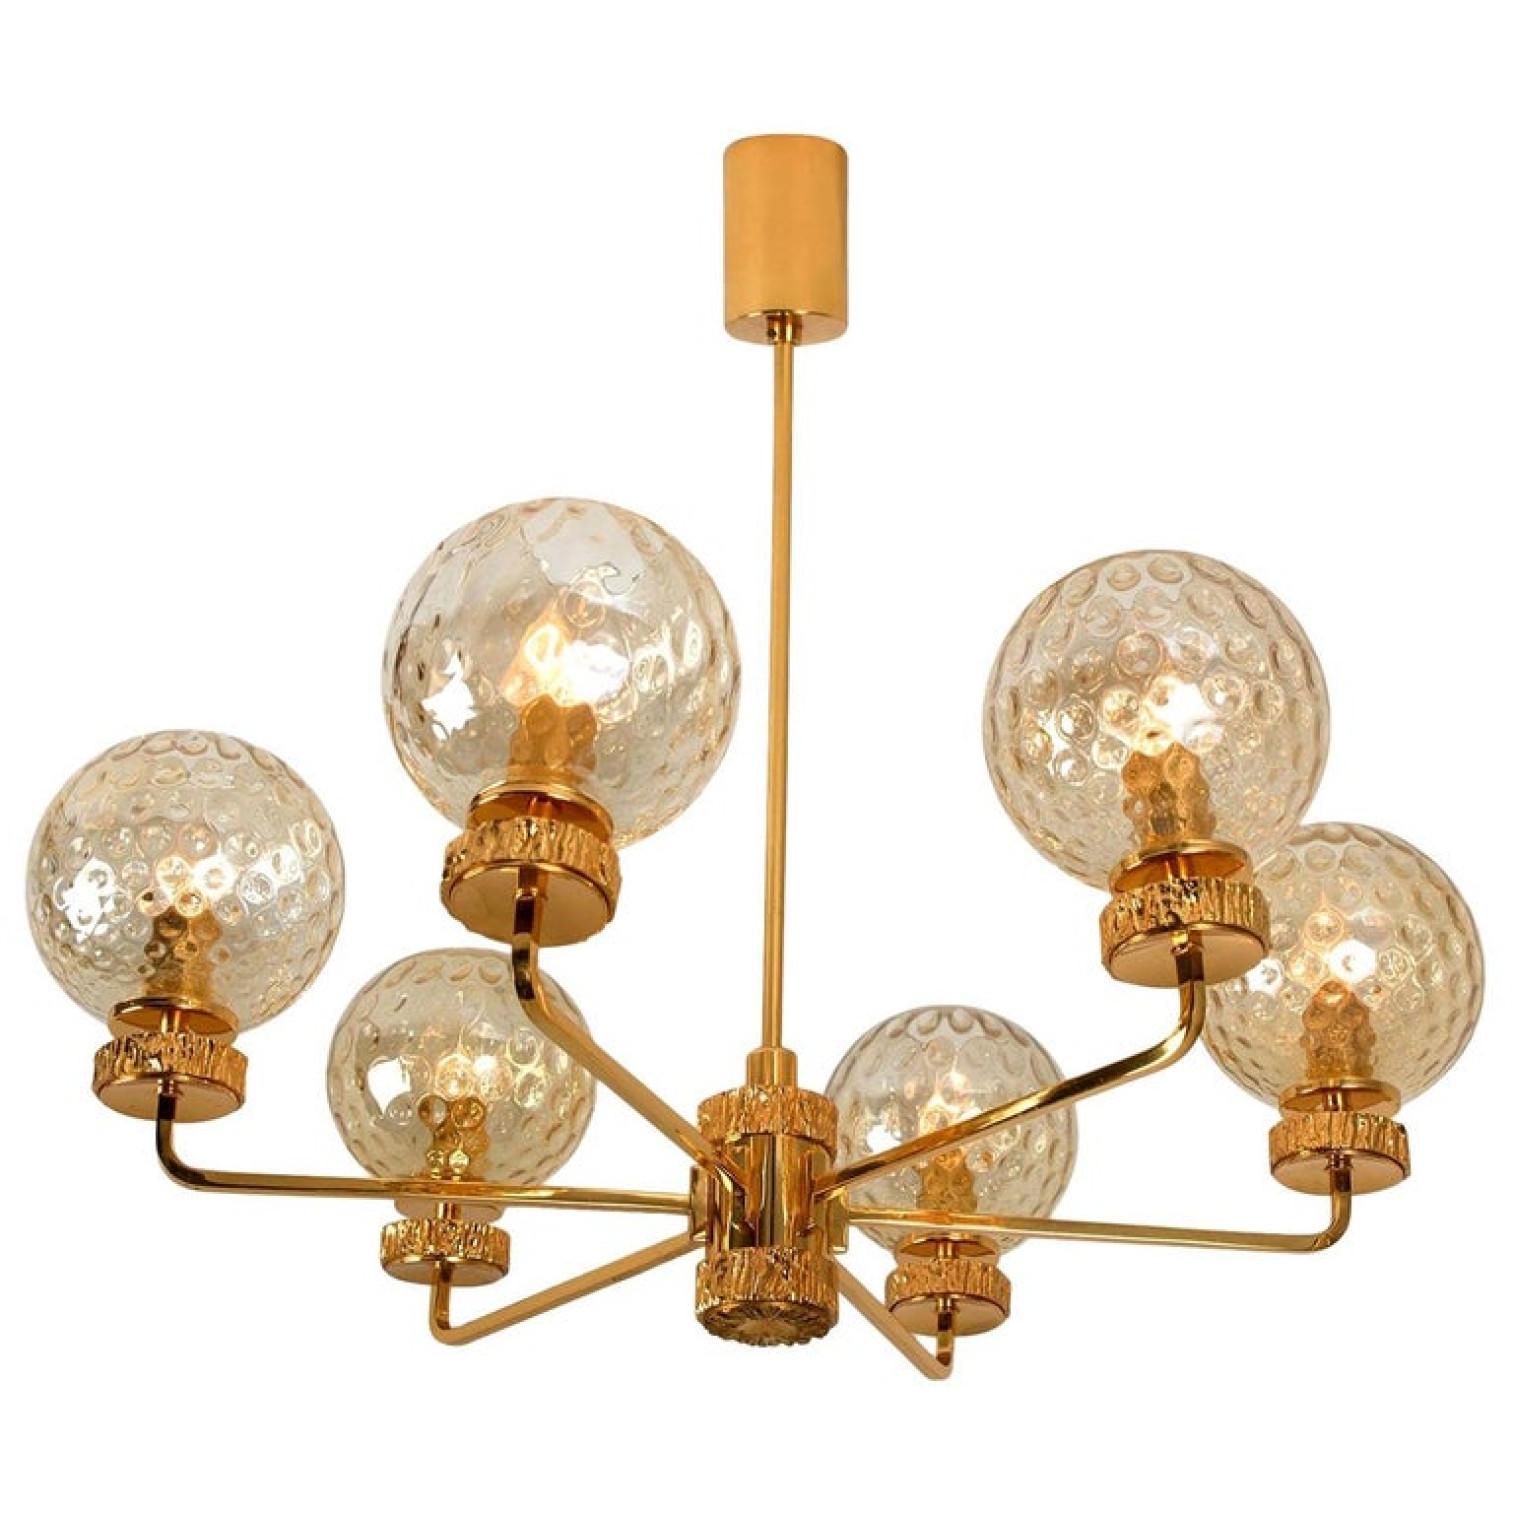 This stunning large pendant chandelier with six textured glass bowls and gold-plated fittings was produced in the 1970s in the style of Brotto. Illuminates beautifully. Elegant and fine, it is comfortable with all decor periods.

This chandelier is